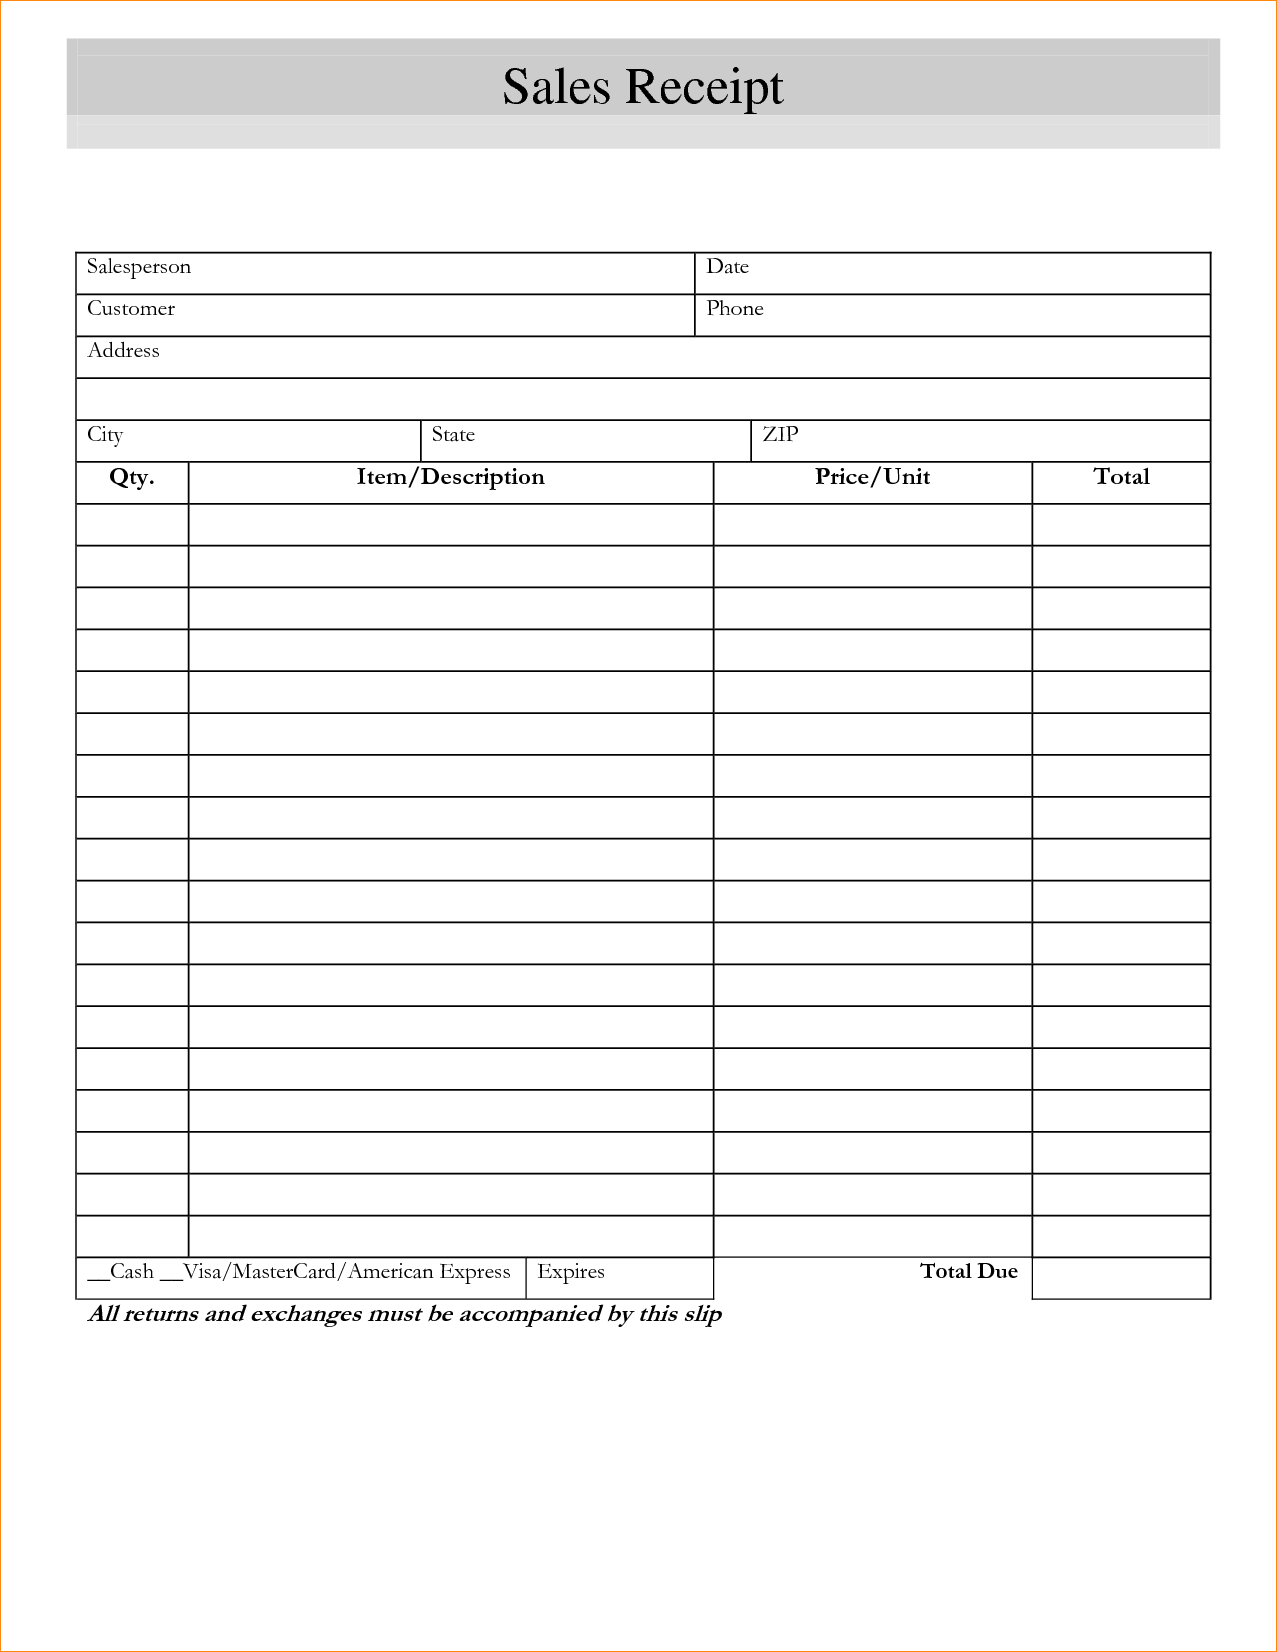 Printable Receipt Forms Free Delivery Form Download For Blank - Free Printable Sales Receipts Online